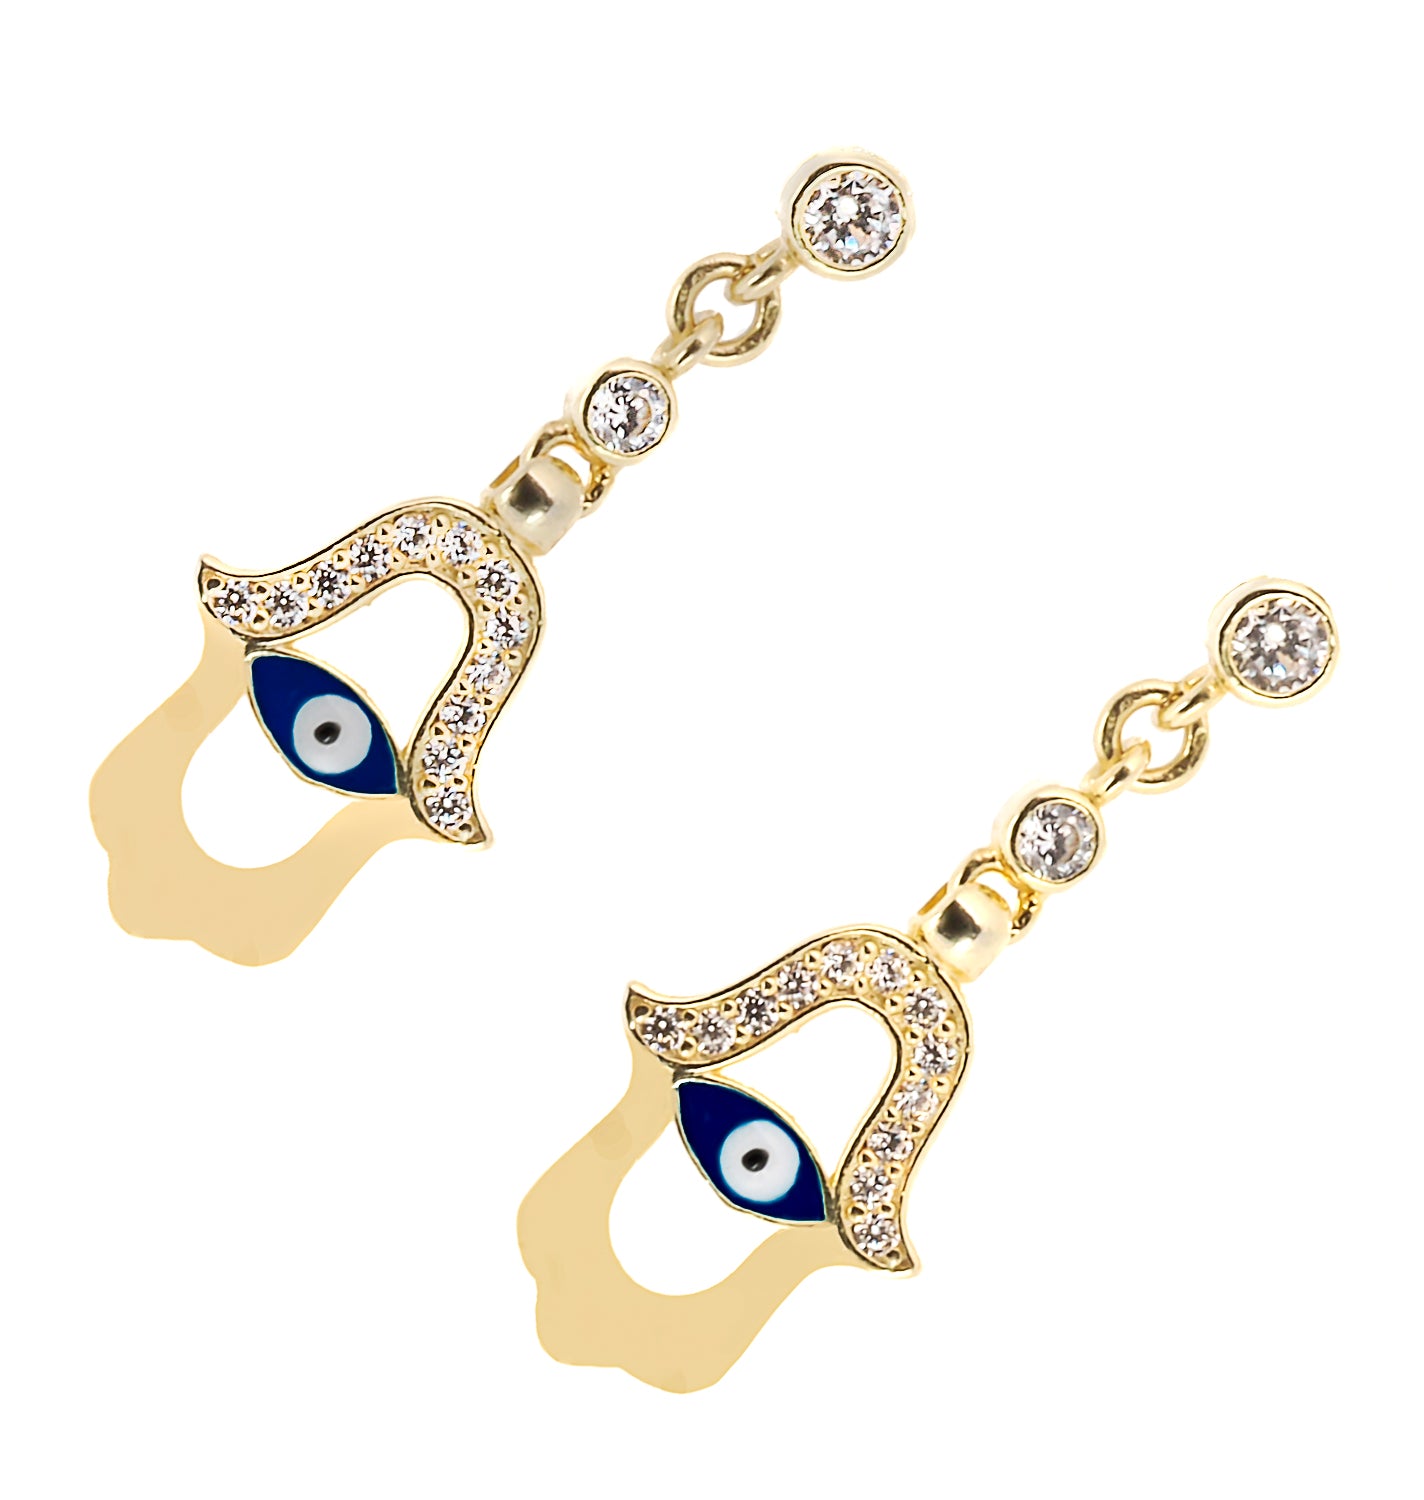 Sterling Silver and 18K Gold Plated - Luxurious and radiant appearance